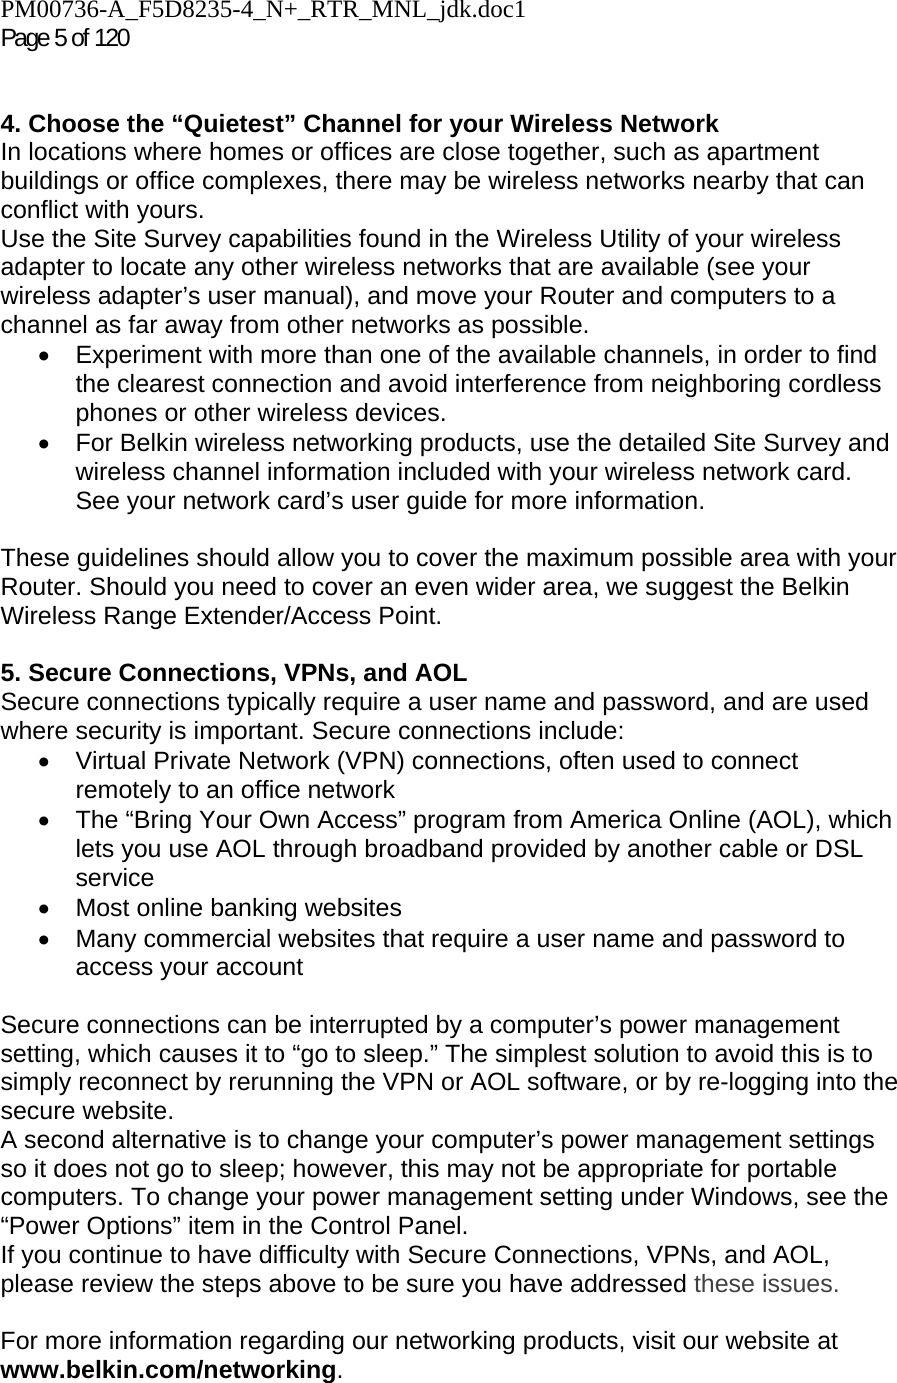 PM00736-A_F5D8235-4_N+_RTR_MNL_jdk.doc1  Page 5 of 120    4. Choose the “Quietest” Channel for your Wireless Network In locations where homes or offices are close together, such as apartment buildings or office complexes, there may be wireless networks nearby that can conflict with yours.  Use the Site Survey capabilities found in the Wireless Utility of your wireless adapter to locate any other wireless networks that are available (see your wireless adapter’s user manual), and move your Router and computers to a channel as far away from other networks as possible. •  Experiment with more than one of the available channels, in order to find the clearest connection and avoid interference from neighboring cordless phones or other wireless devices.  •  For Belkin wireless networking products, use the detailed Site Survey and wireless channel information included with your wireless network card. See your network card’s user guide for more information.  These guidelines should allow you to cover the maximum possible area with your Router. Should you need to cover an even wider area, we suggest the Belkin Wireless Range Extender/Access Point.  5. Secure Connections, VPNs, and AOL Secure connections typically require a user name and password, and are used where security is important. Secure connections include: •  Virtual Private Network (VPN) connections, often used to connect remotely to an office network •  The “Bring Your Own Access” program from America Online (AOL), which lets you use AOL through broadband provided by another cable or DSL service •  Most online banking websites •  Many commercial websites that require a user name and password to access your account   Secure connections can be interrupted by a computer’s power management setting, which causes it to “go to sleep.” The simplest solution to avoid this is to simply reconnect by rerunning the VPN or AOL software, or by re-logging into the secure website. A second alternative is to change your computer’s power management settings so it does not go to sleep; however, this may not be appropriate for portable computers. To change your power management setting under Windows, see the “Power Options” item in the Control Panel. If you continue to have difficulty with Secure Connections, VPNs, and AOL, please review the steps above to be sure you have addressed these issues.  For more information regarding our networking products, visit our website at www.belkin.com/networking.   